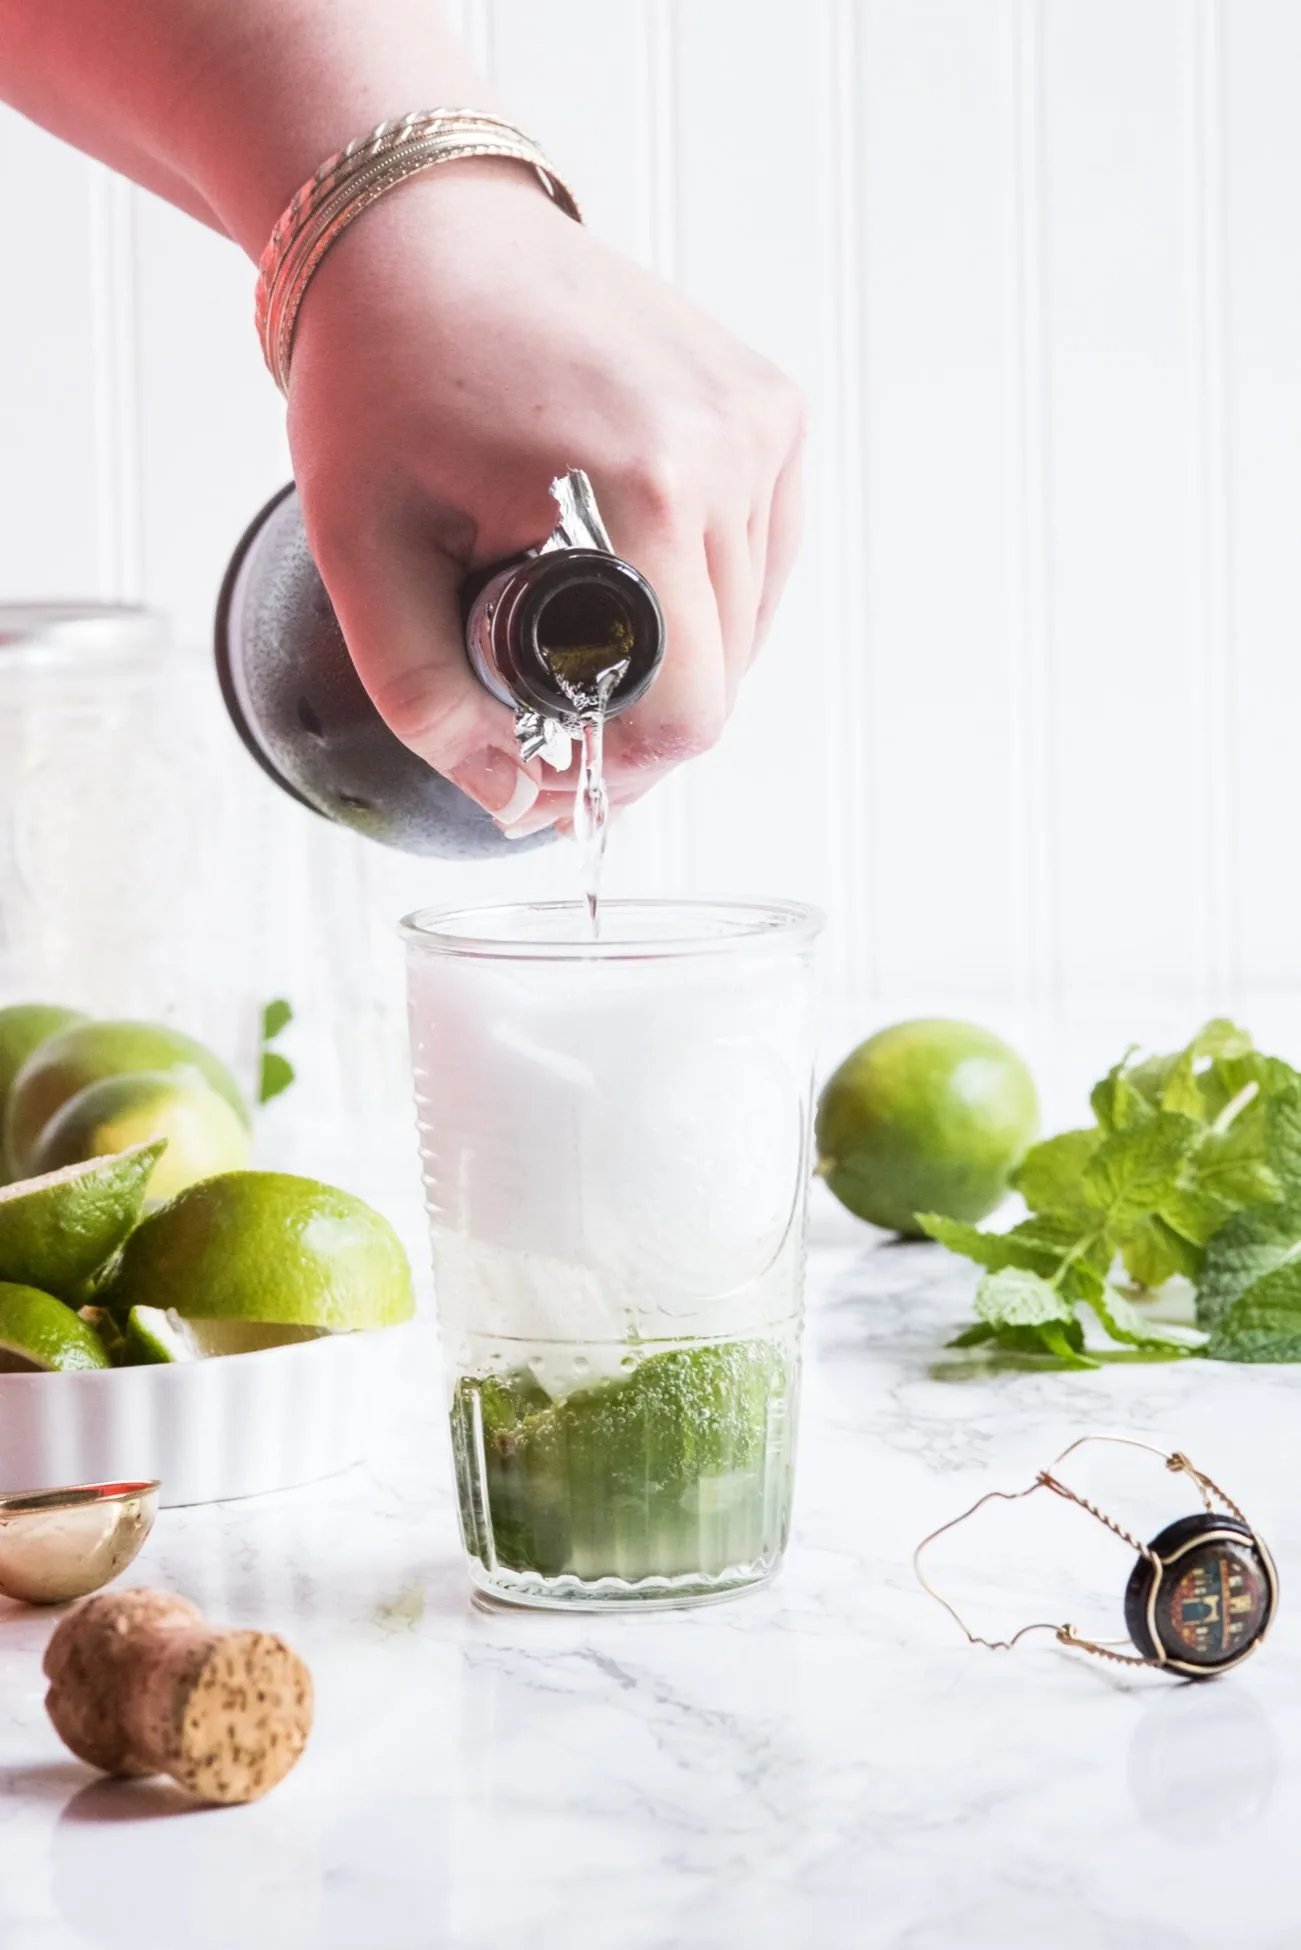 Champagne Mojito Recipe | Cocktail recipes, entertaining tips, party ideas, party recipes and more from @cydconverse